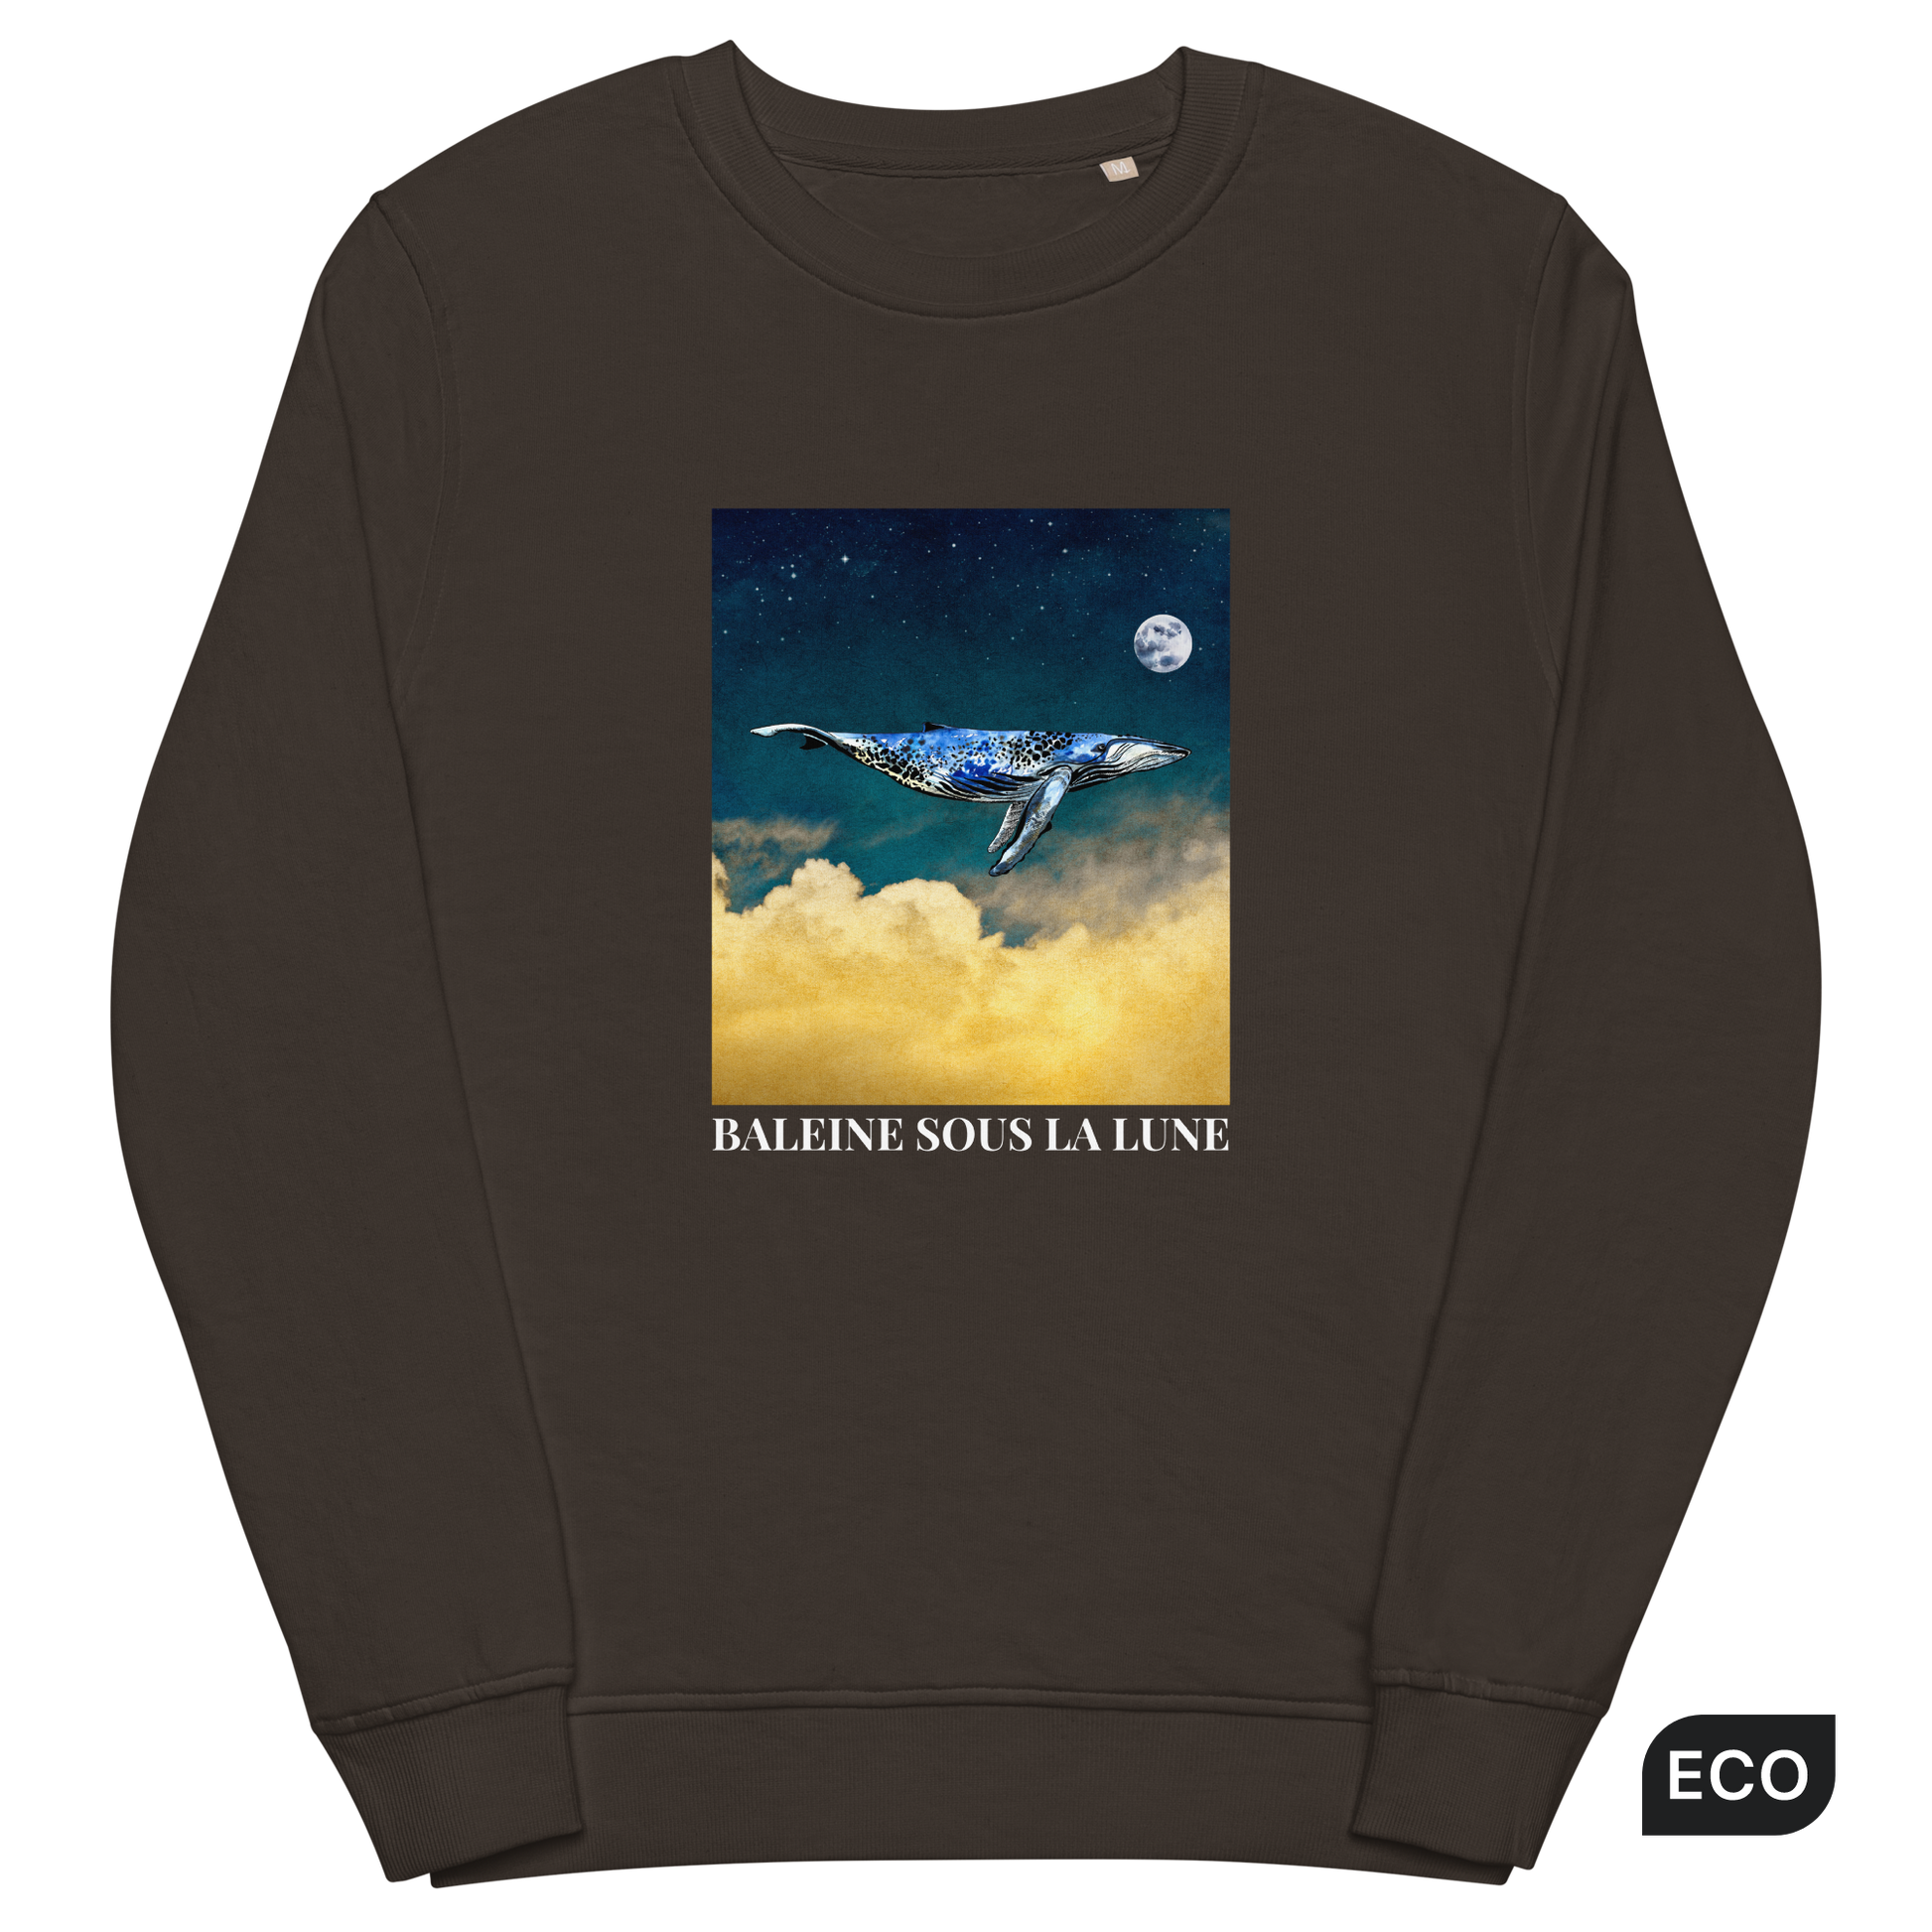 Deep Charcoal Grey Organic Cotton Whale Sweatshirt showcasing an enchanting Whale Under The Moon graphic on the chest - Cool Whale Graphic Sweatshirts - Boozy Fox